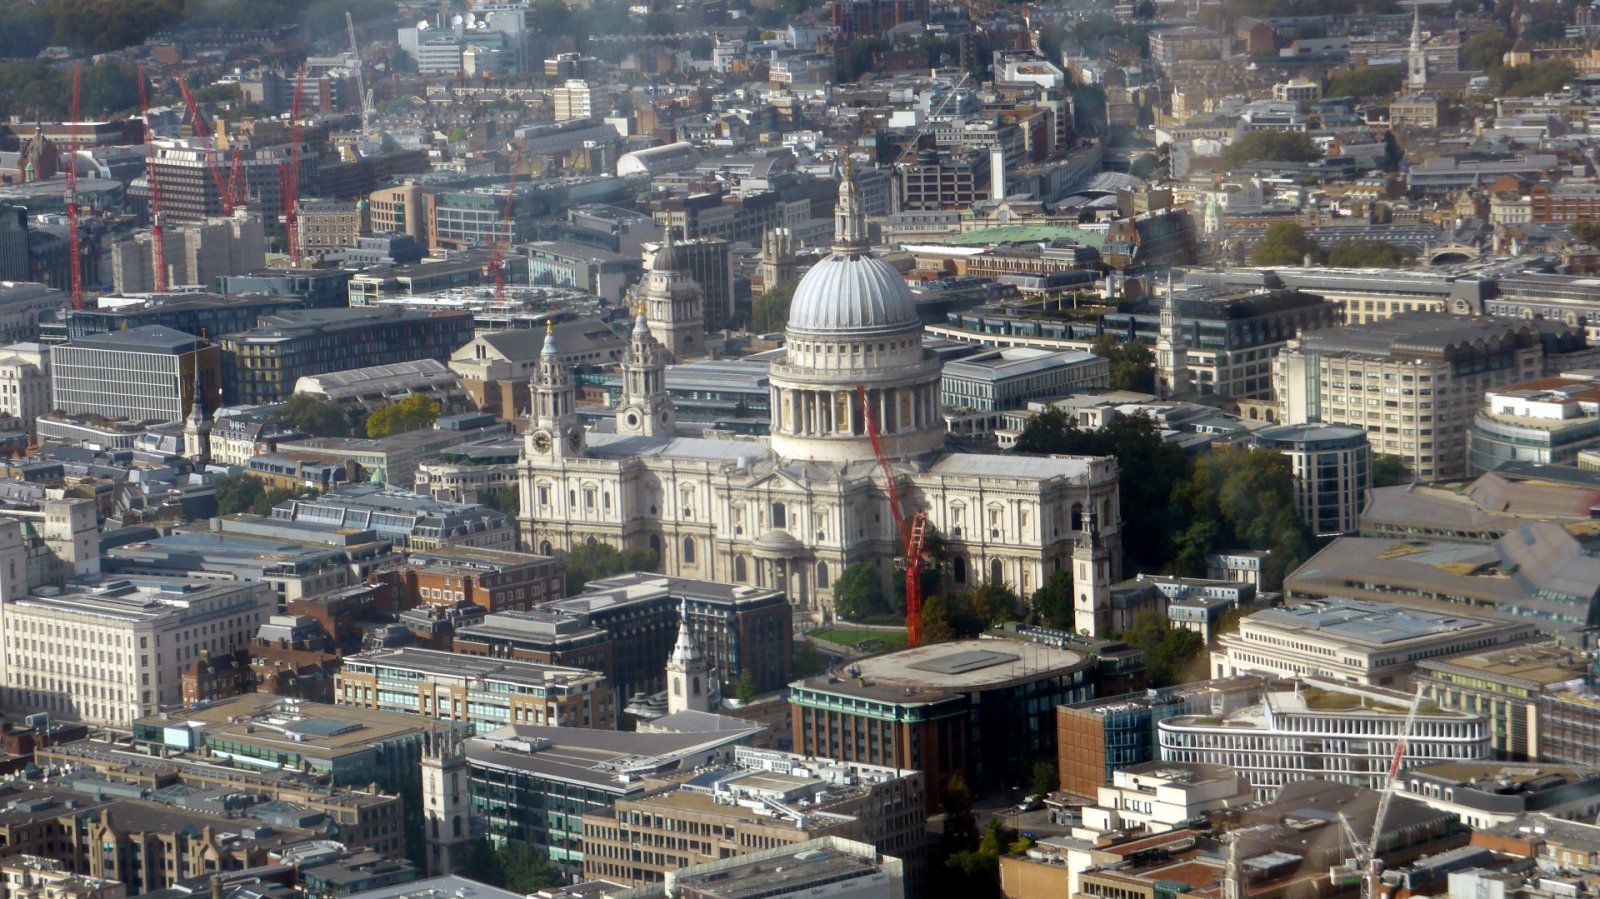 London From The Shard 2016 (5)